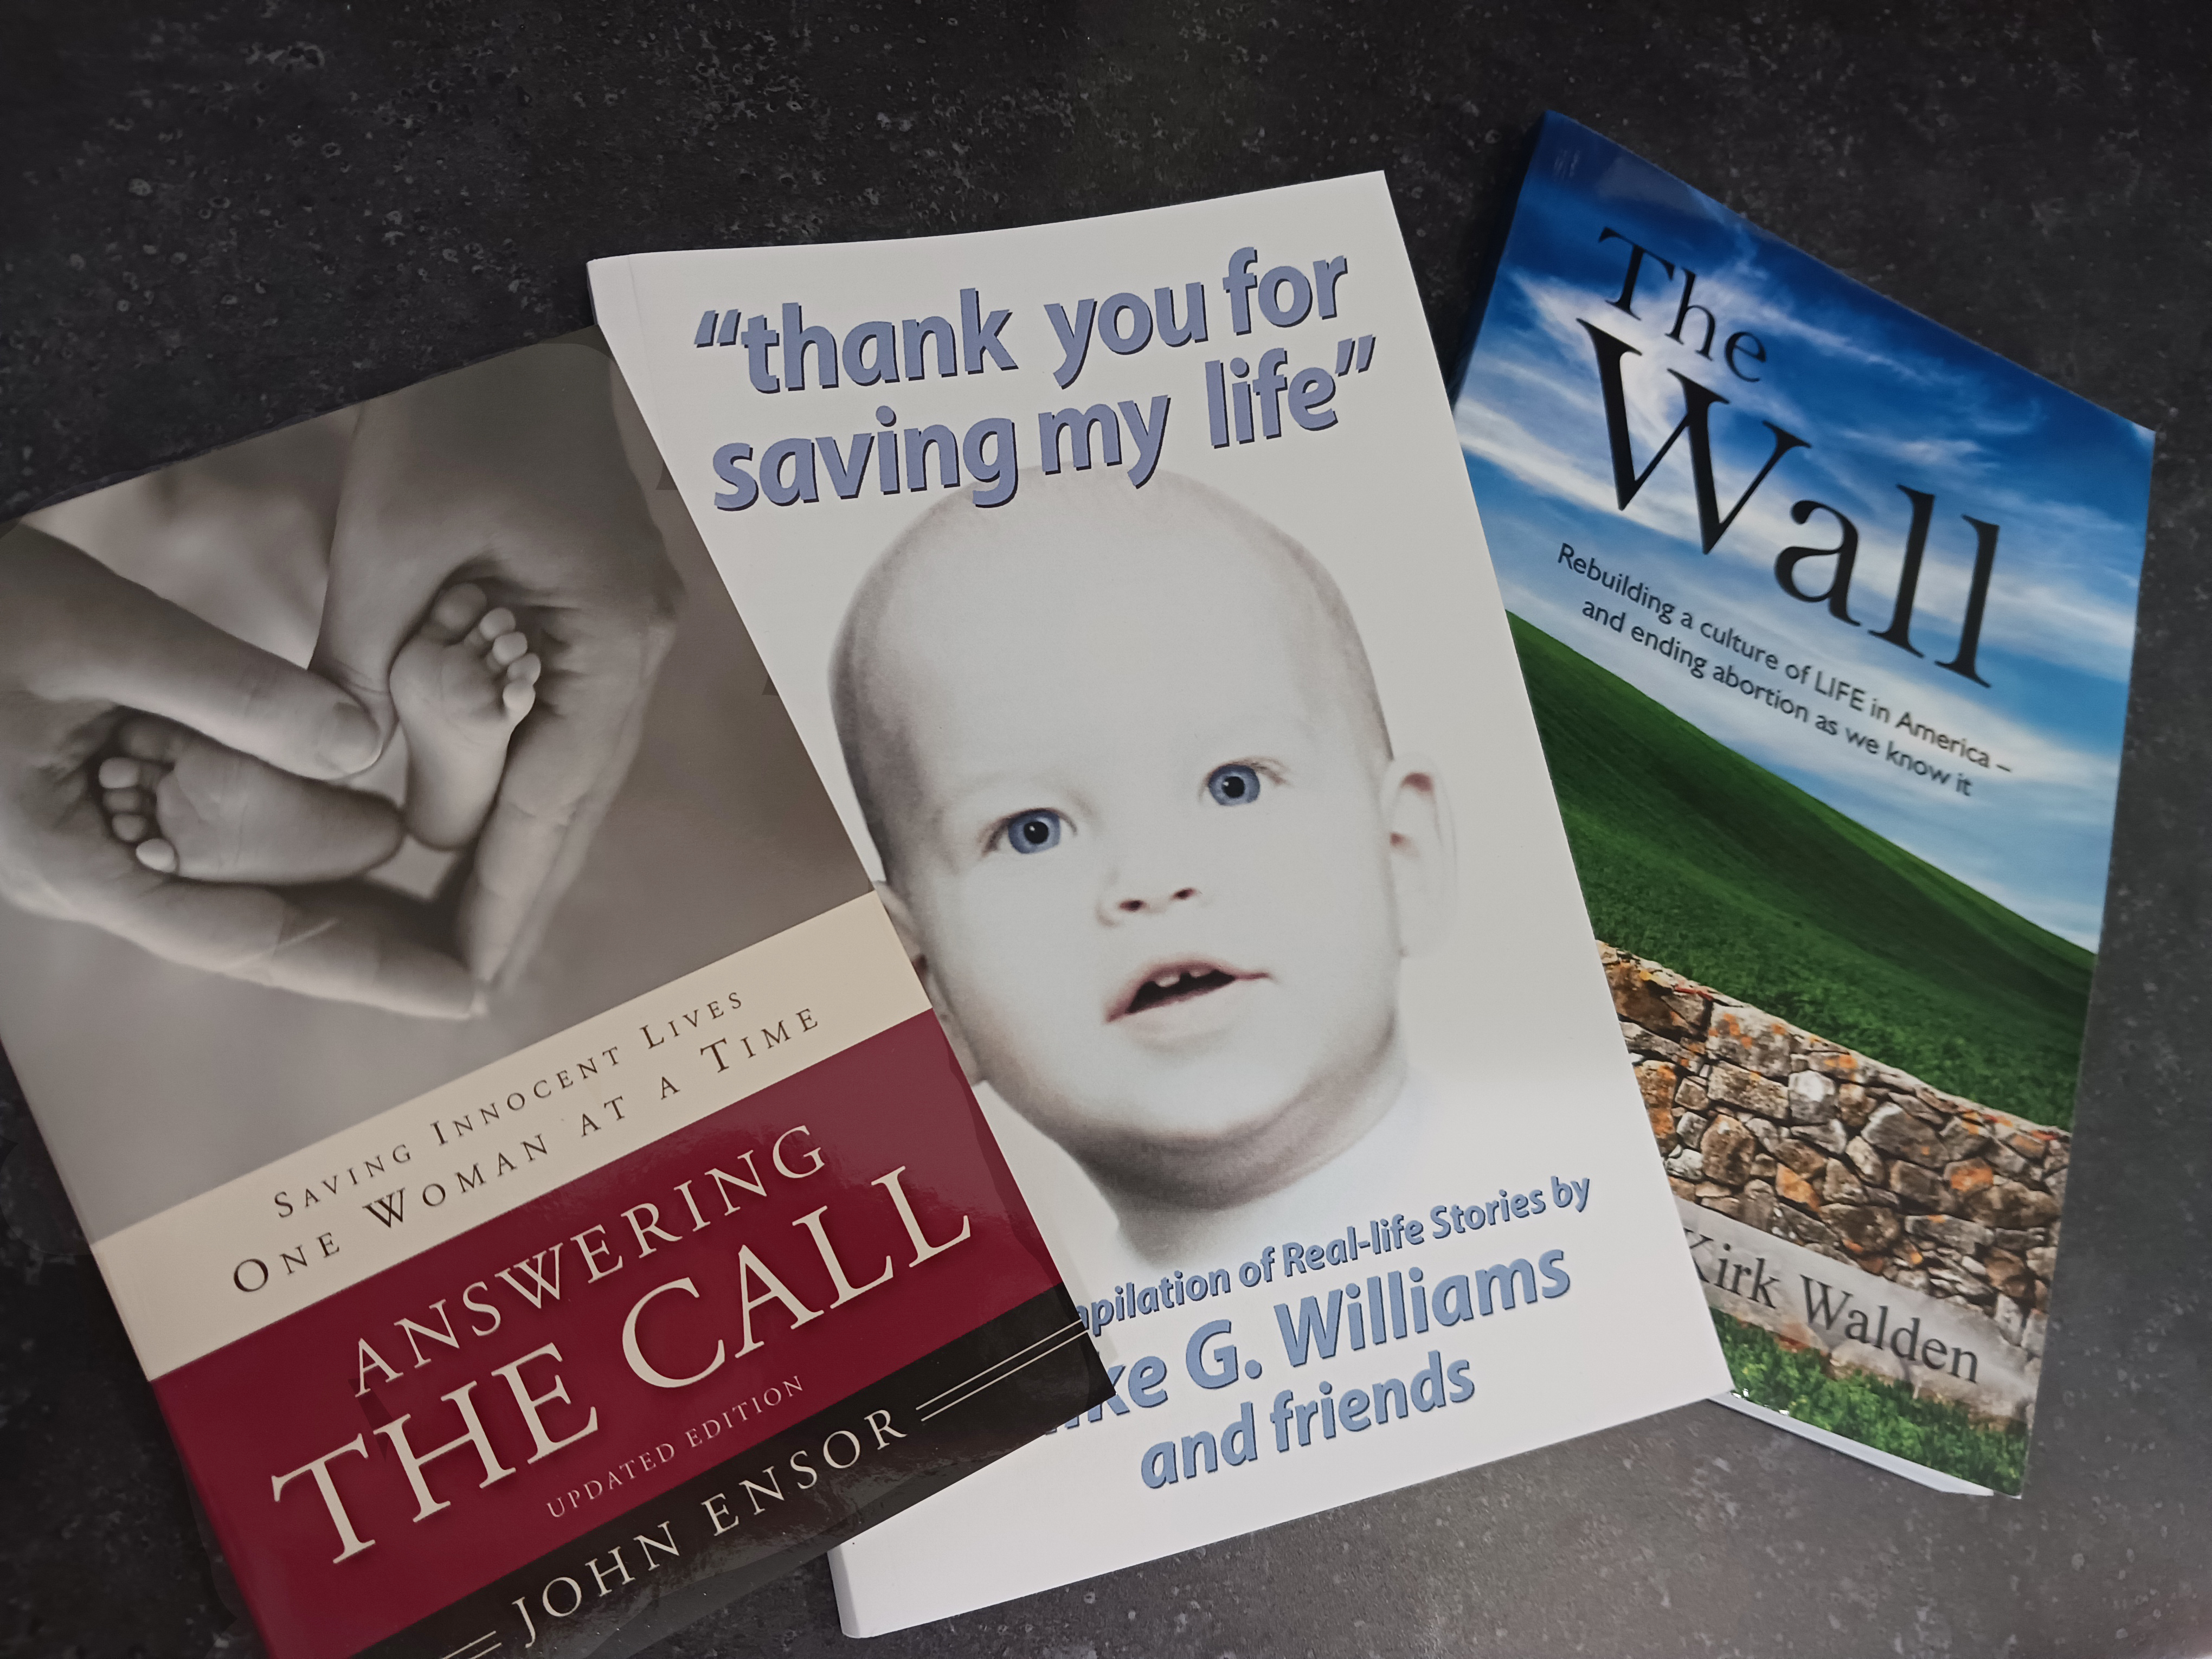 3 books: Answering the Call, "thank you for saving my life," and The Wall